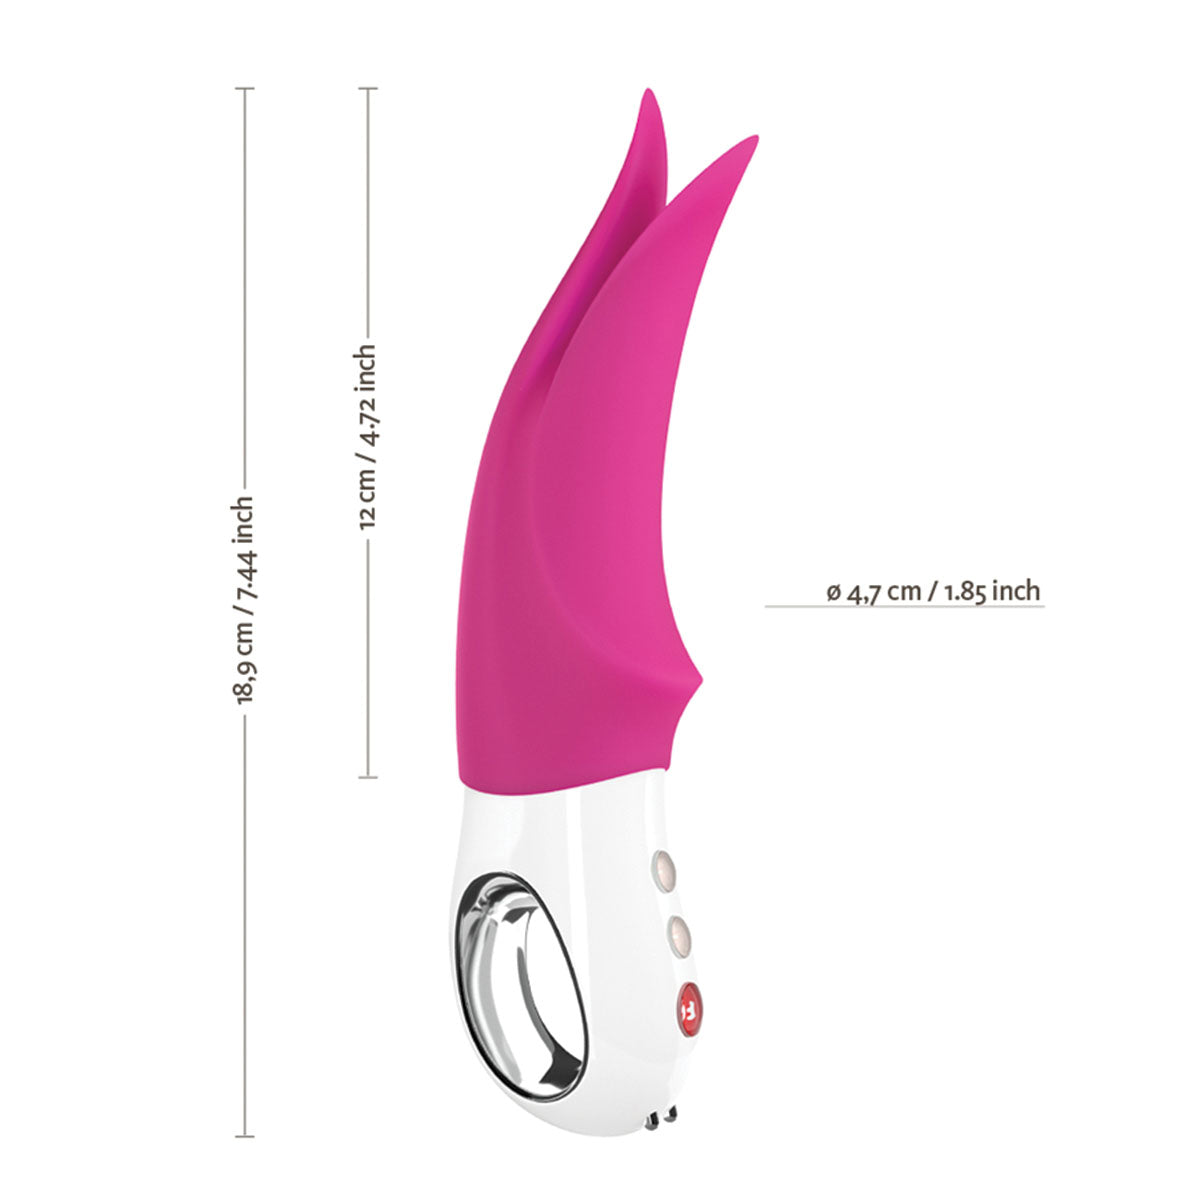 Fun Factory Volta Rechargeable External Vibrator - Blackberry shown against a white background side view with the measurements